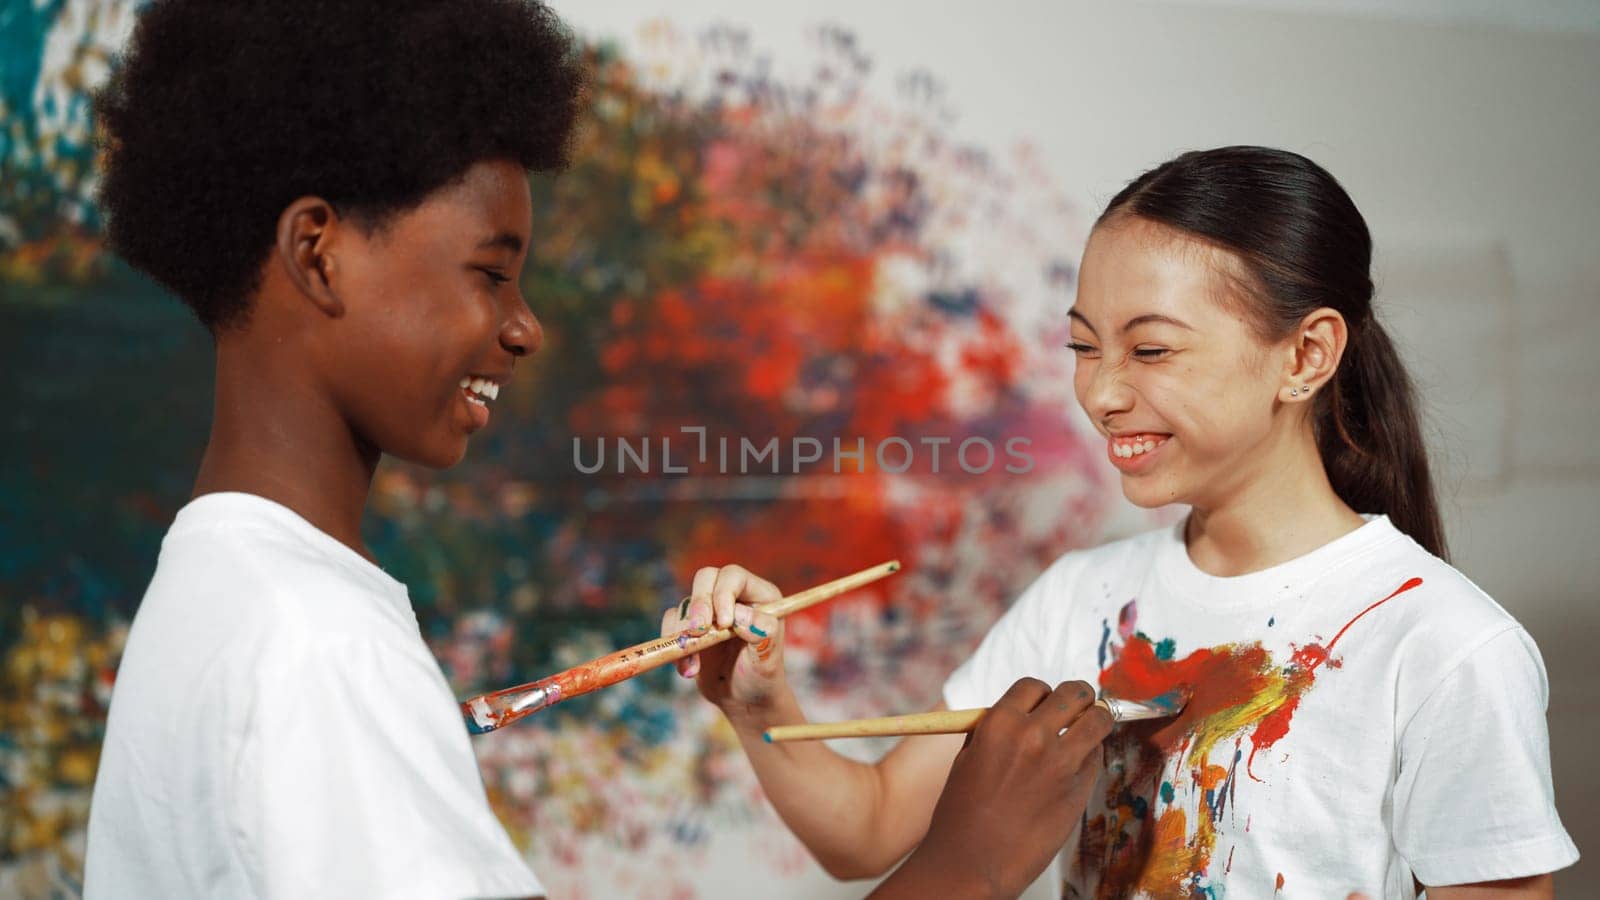 Smiling diverse children using paint brush painted color on each other white shirt shirt at colorful stained wall in art lesson. Represent exchanging experience, learning each other. Edification.